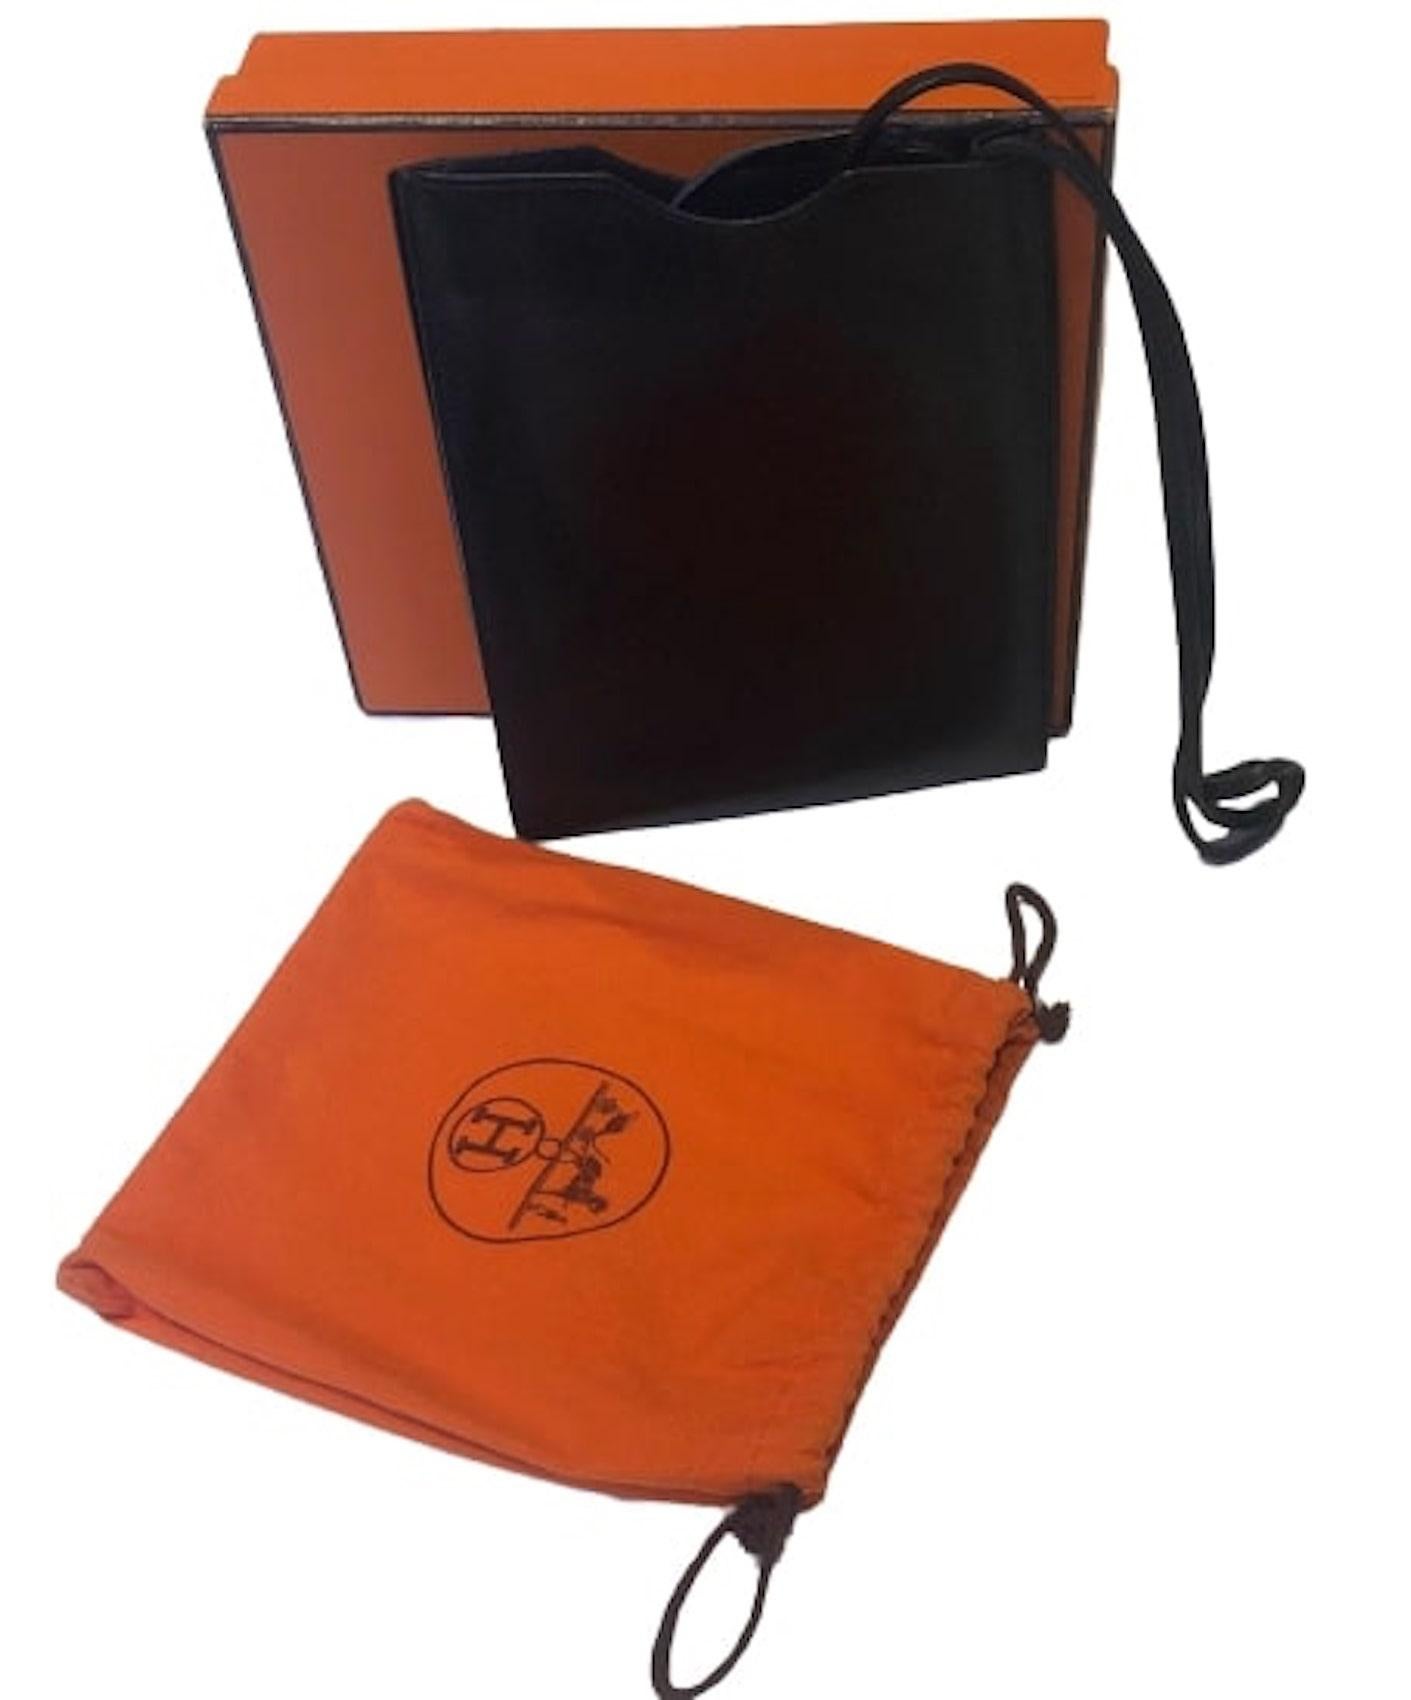 HERMÈS Vintage Onimaitou Crossbody Shoulder Bag Pochette Box Calf Black
A small Hermès Onimaitou pouch-pochette bag, long strap for shoulder or cross-body, in very good condition. Handcrafted in black box calf leather, the interior is lined in black